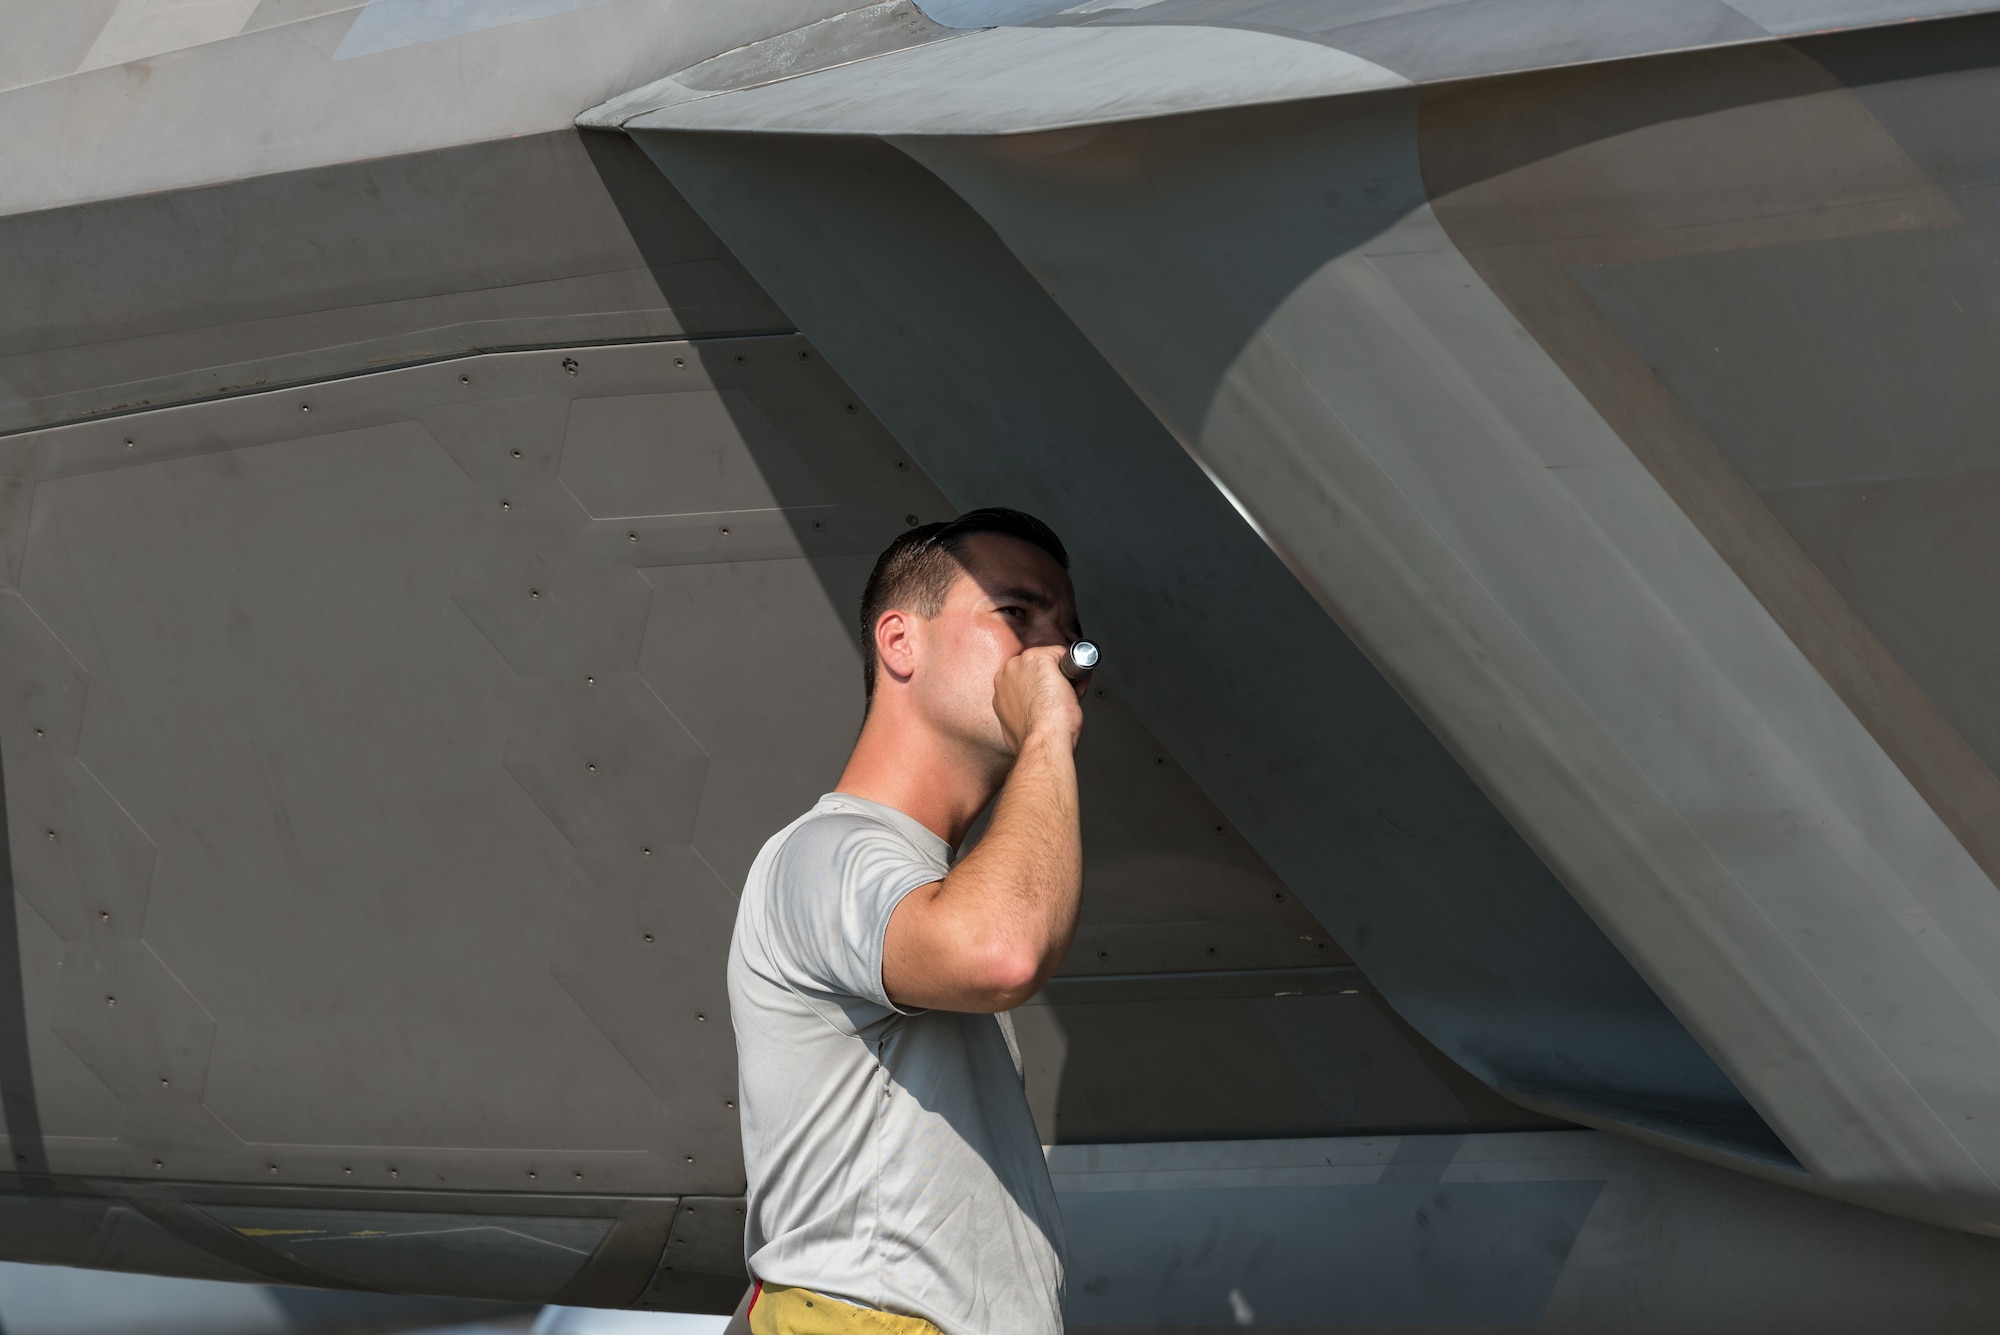 Staff Sgt. Zach Zistl, F-22 Raptor dedicated crew chief, inspects the engine intake Sept. 12, 2019, at Dover Air Force Base, Del. Zistl is a  member of the F-22 demonstration team from Joint Base Langley-Eustis, Va., that is scheduled to perform at the Thunder Over Dover 2019 open house and air show. (U.S. Air Force photo by Roland Balik)